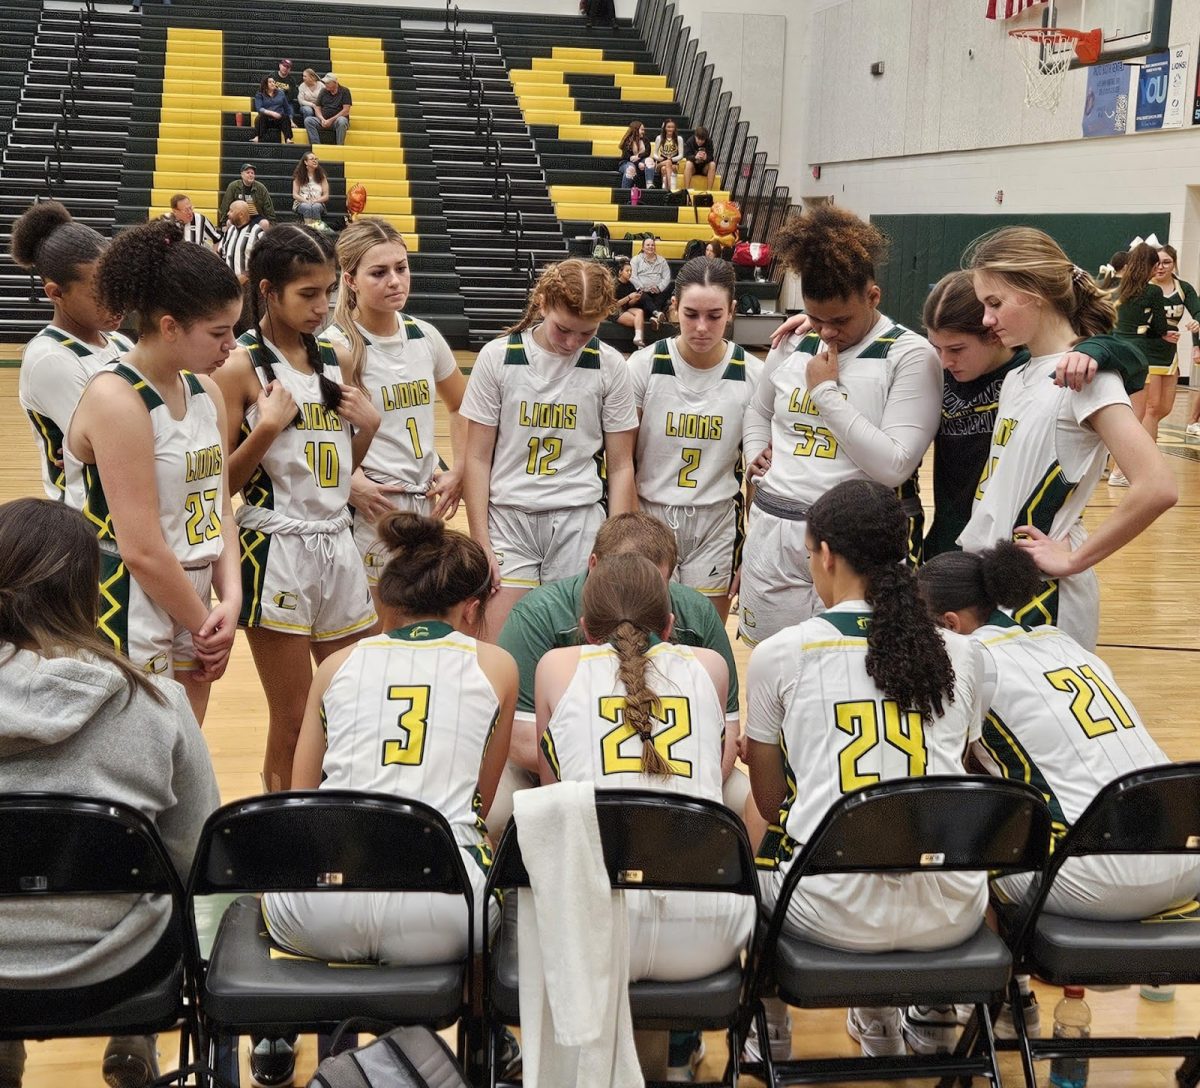 The Lady Lions varsity basketball team huddled together during a timeout in their game against Albemarle 